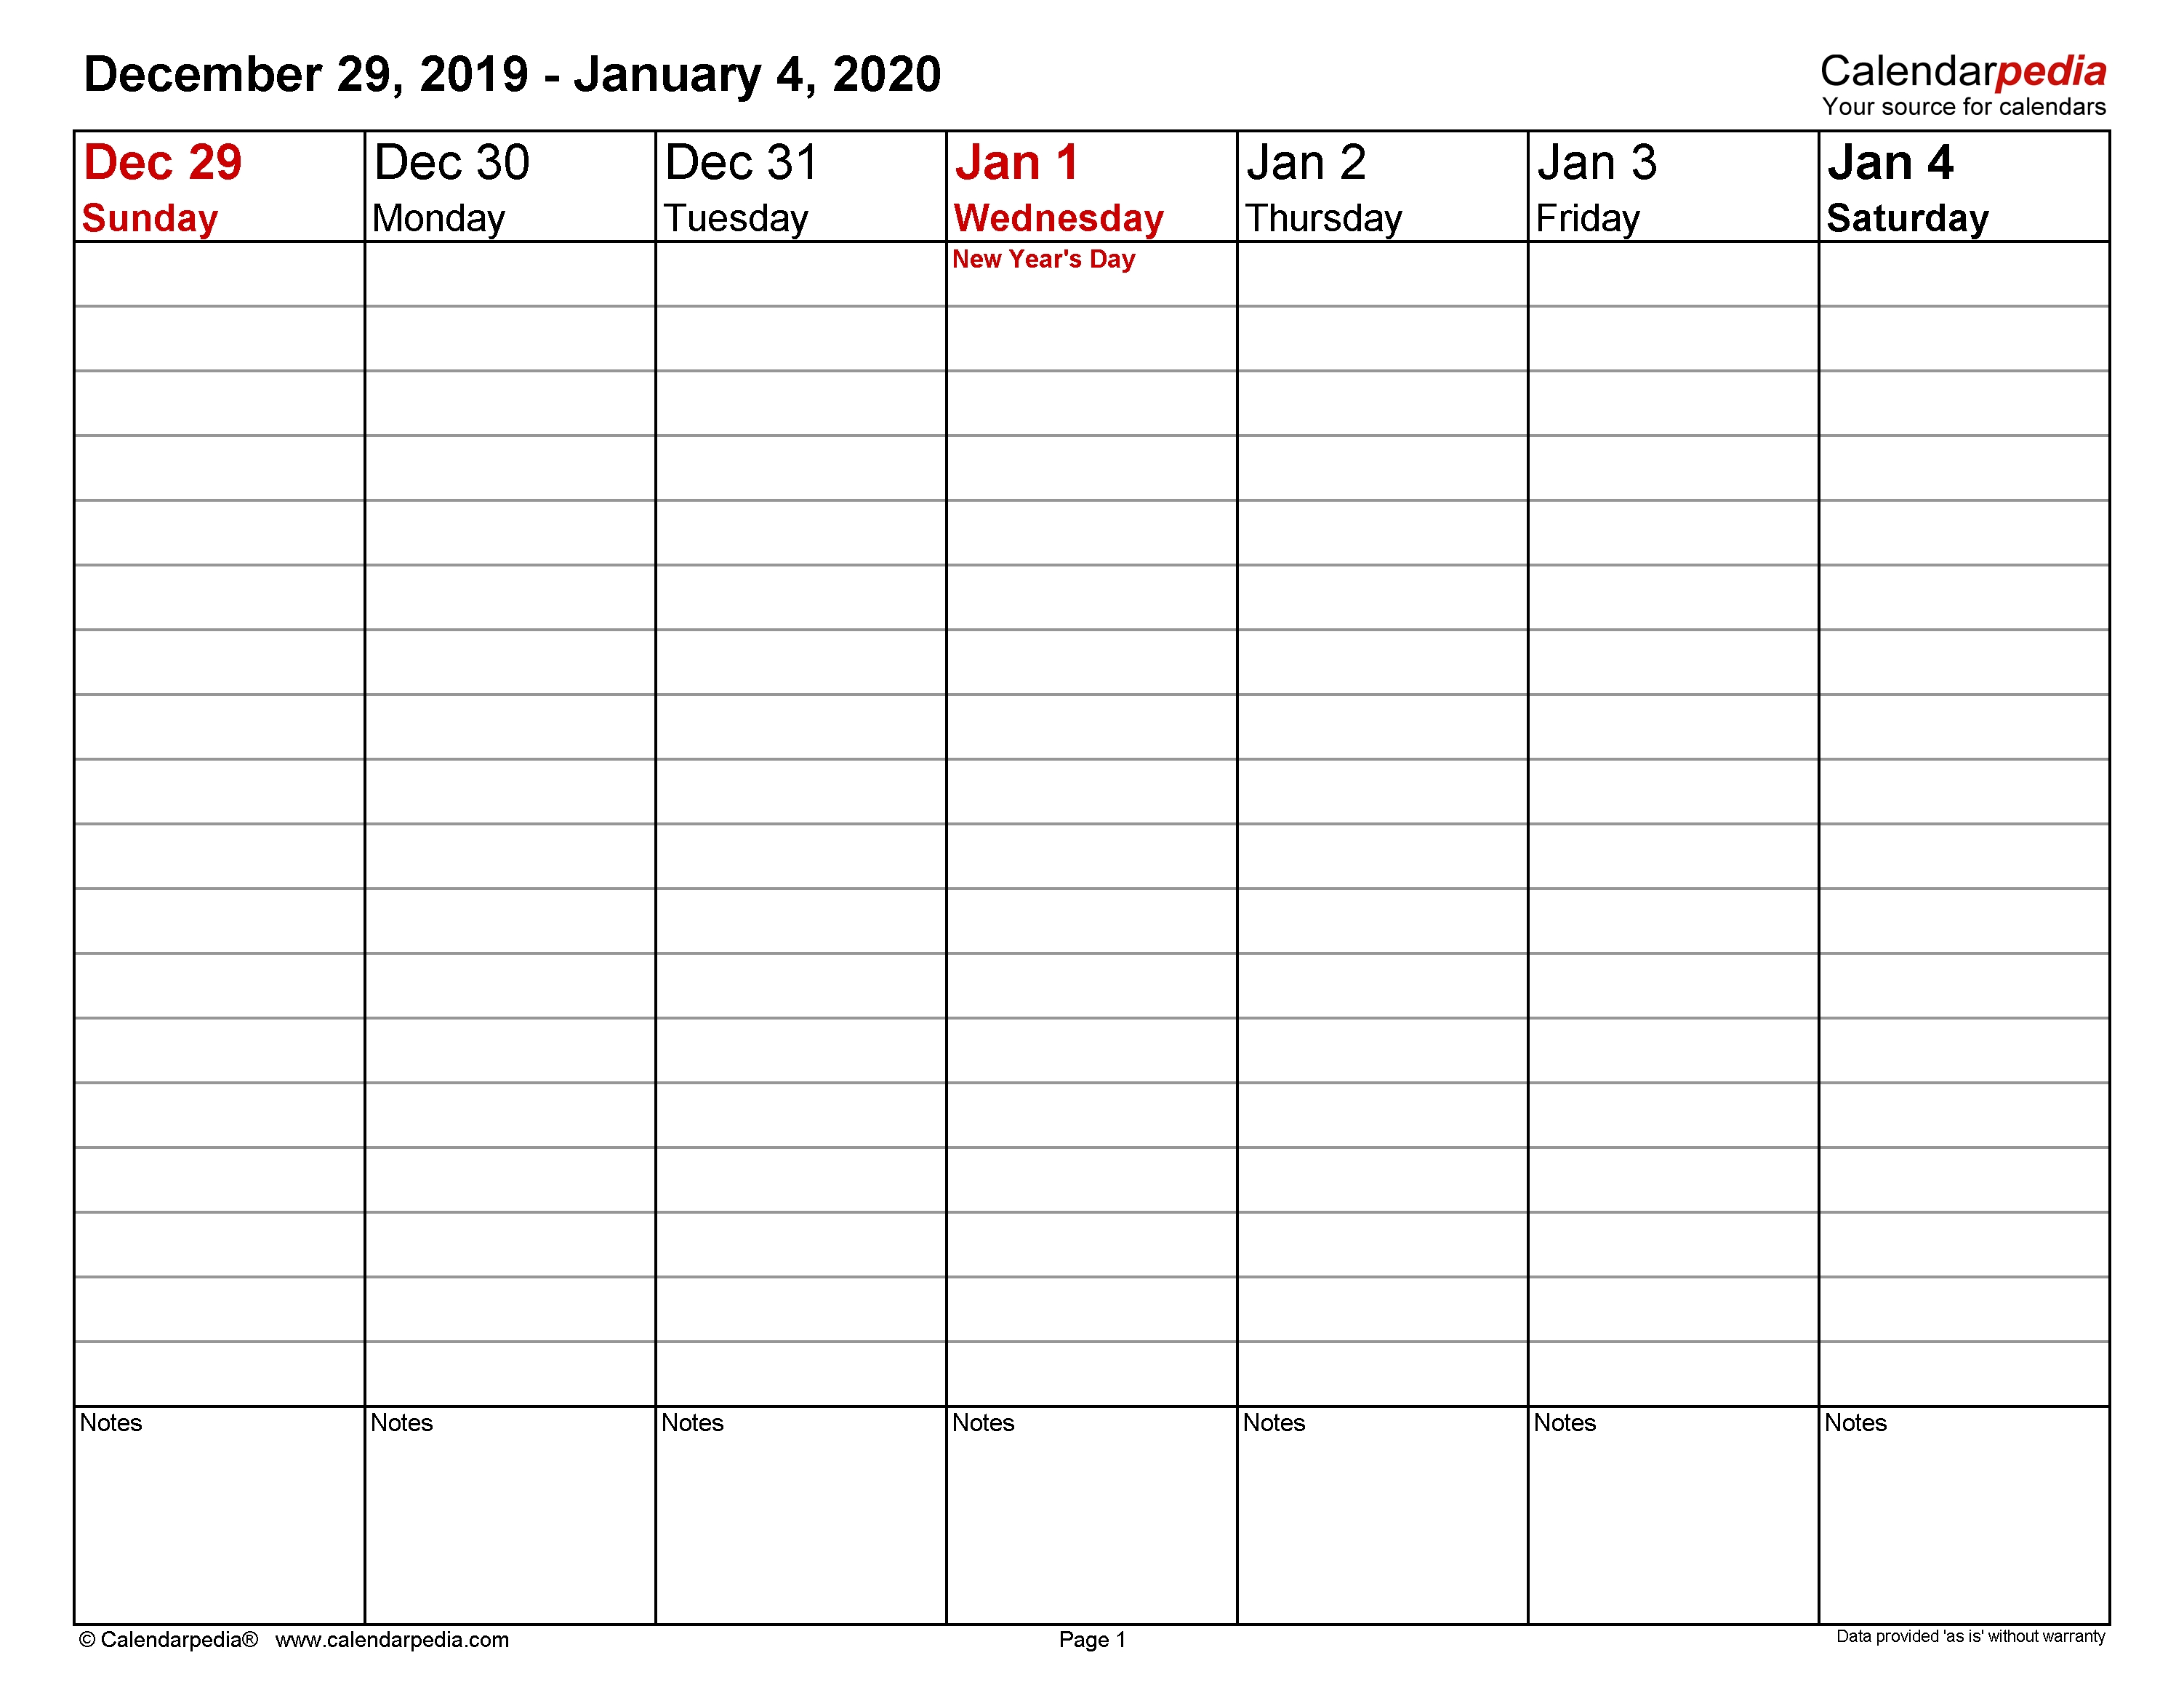 Weekly Calendars 2020 For Word - 12 Free Printable Templates-Day To Day Calendar Template 2020